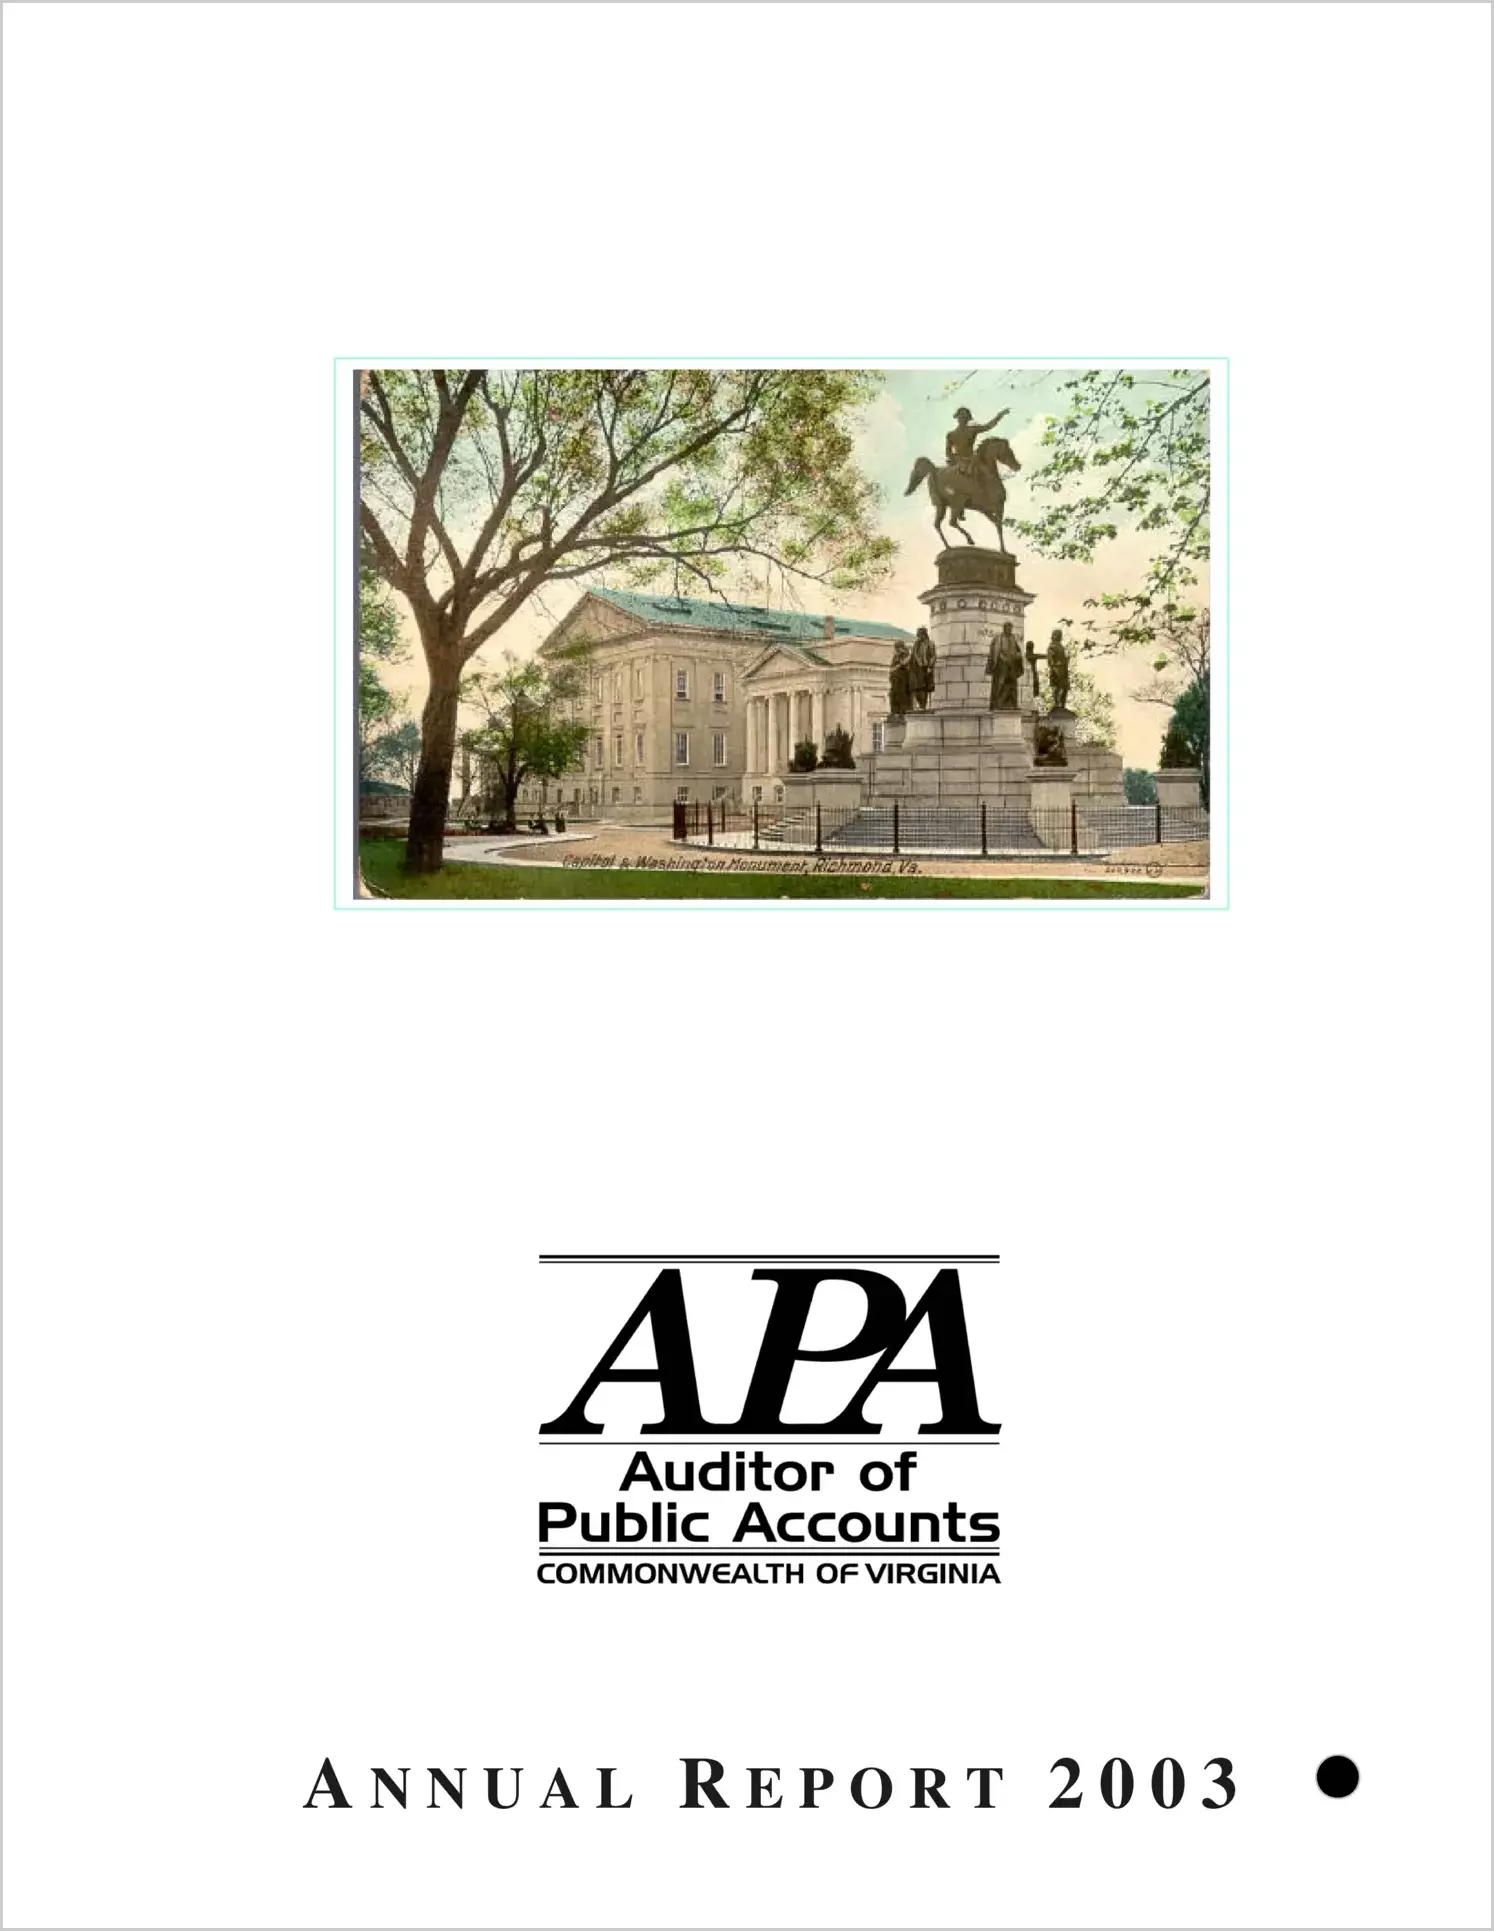 Special ReportAuditor of Public Accounts Annual Report to the General Assembly for 2003(Report Date: October 2003)